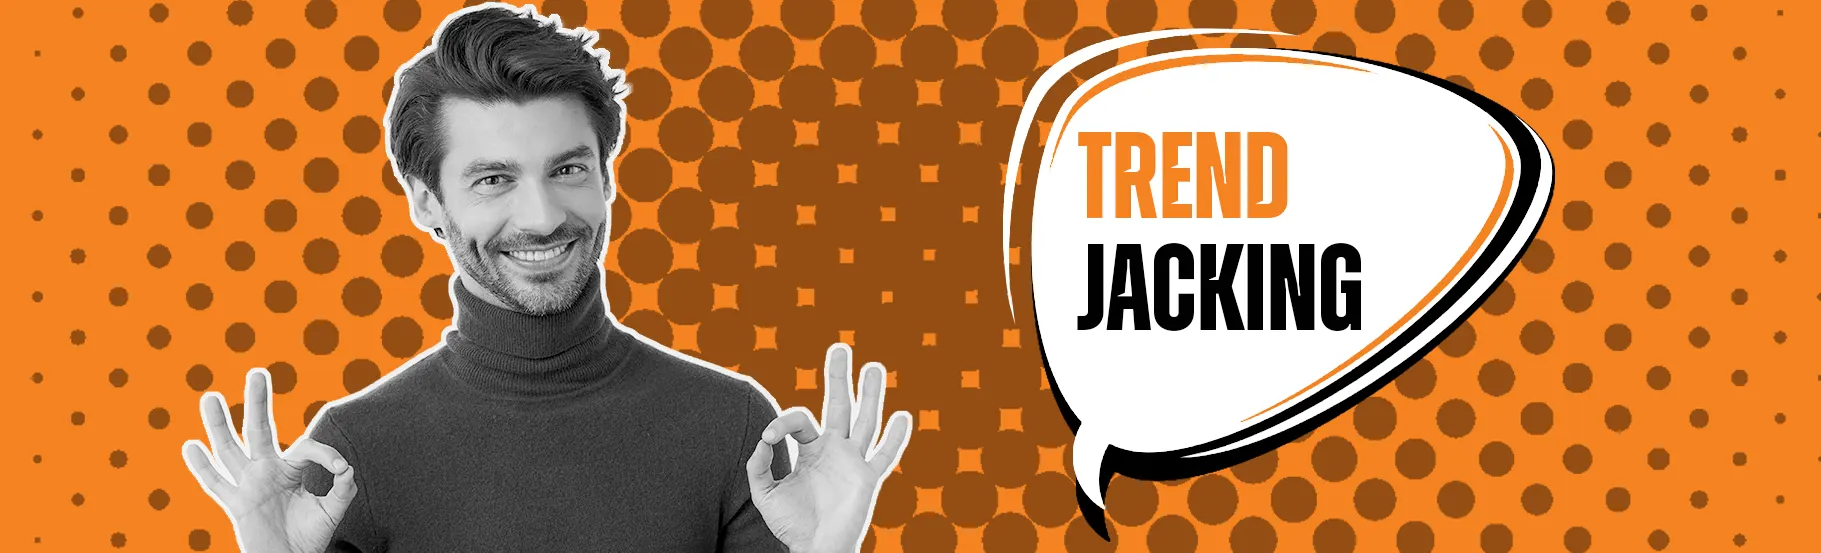 Trendjacking: A guide to creating a quality viral content